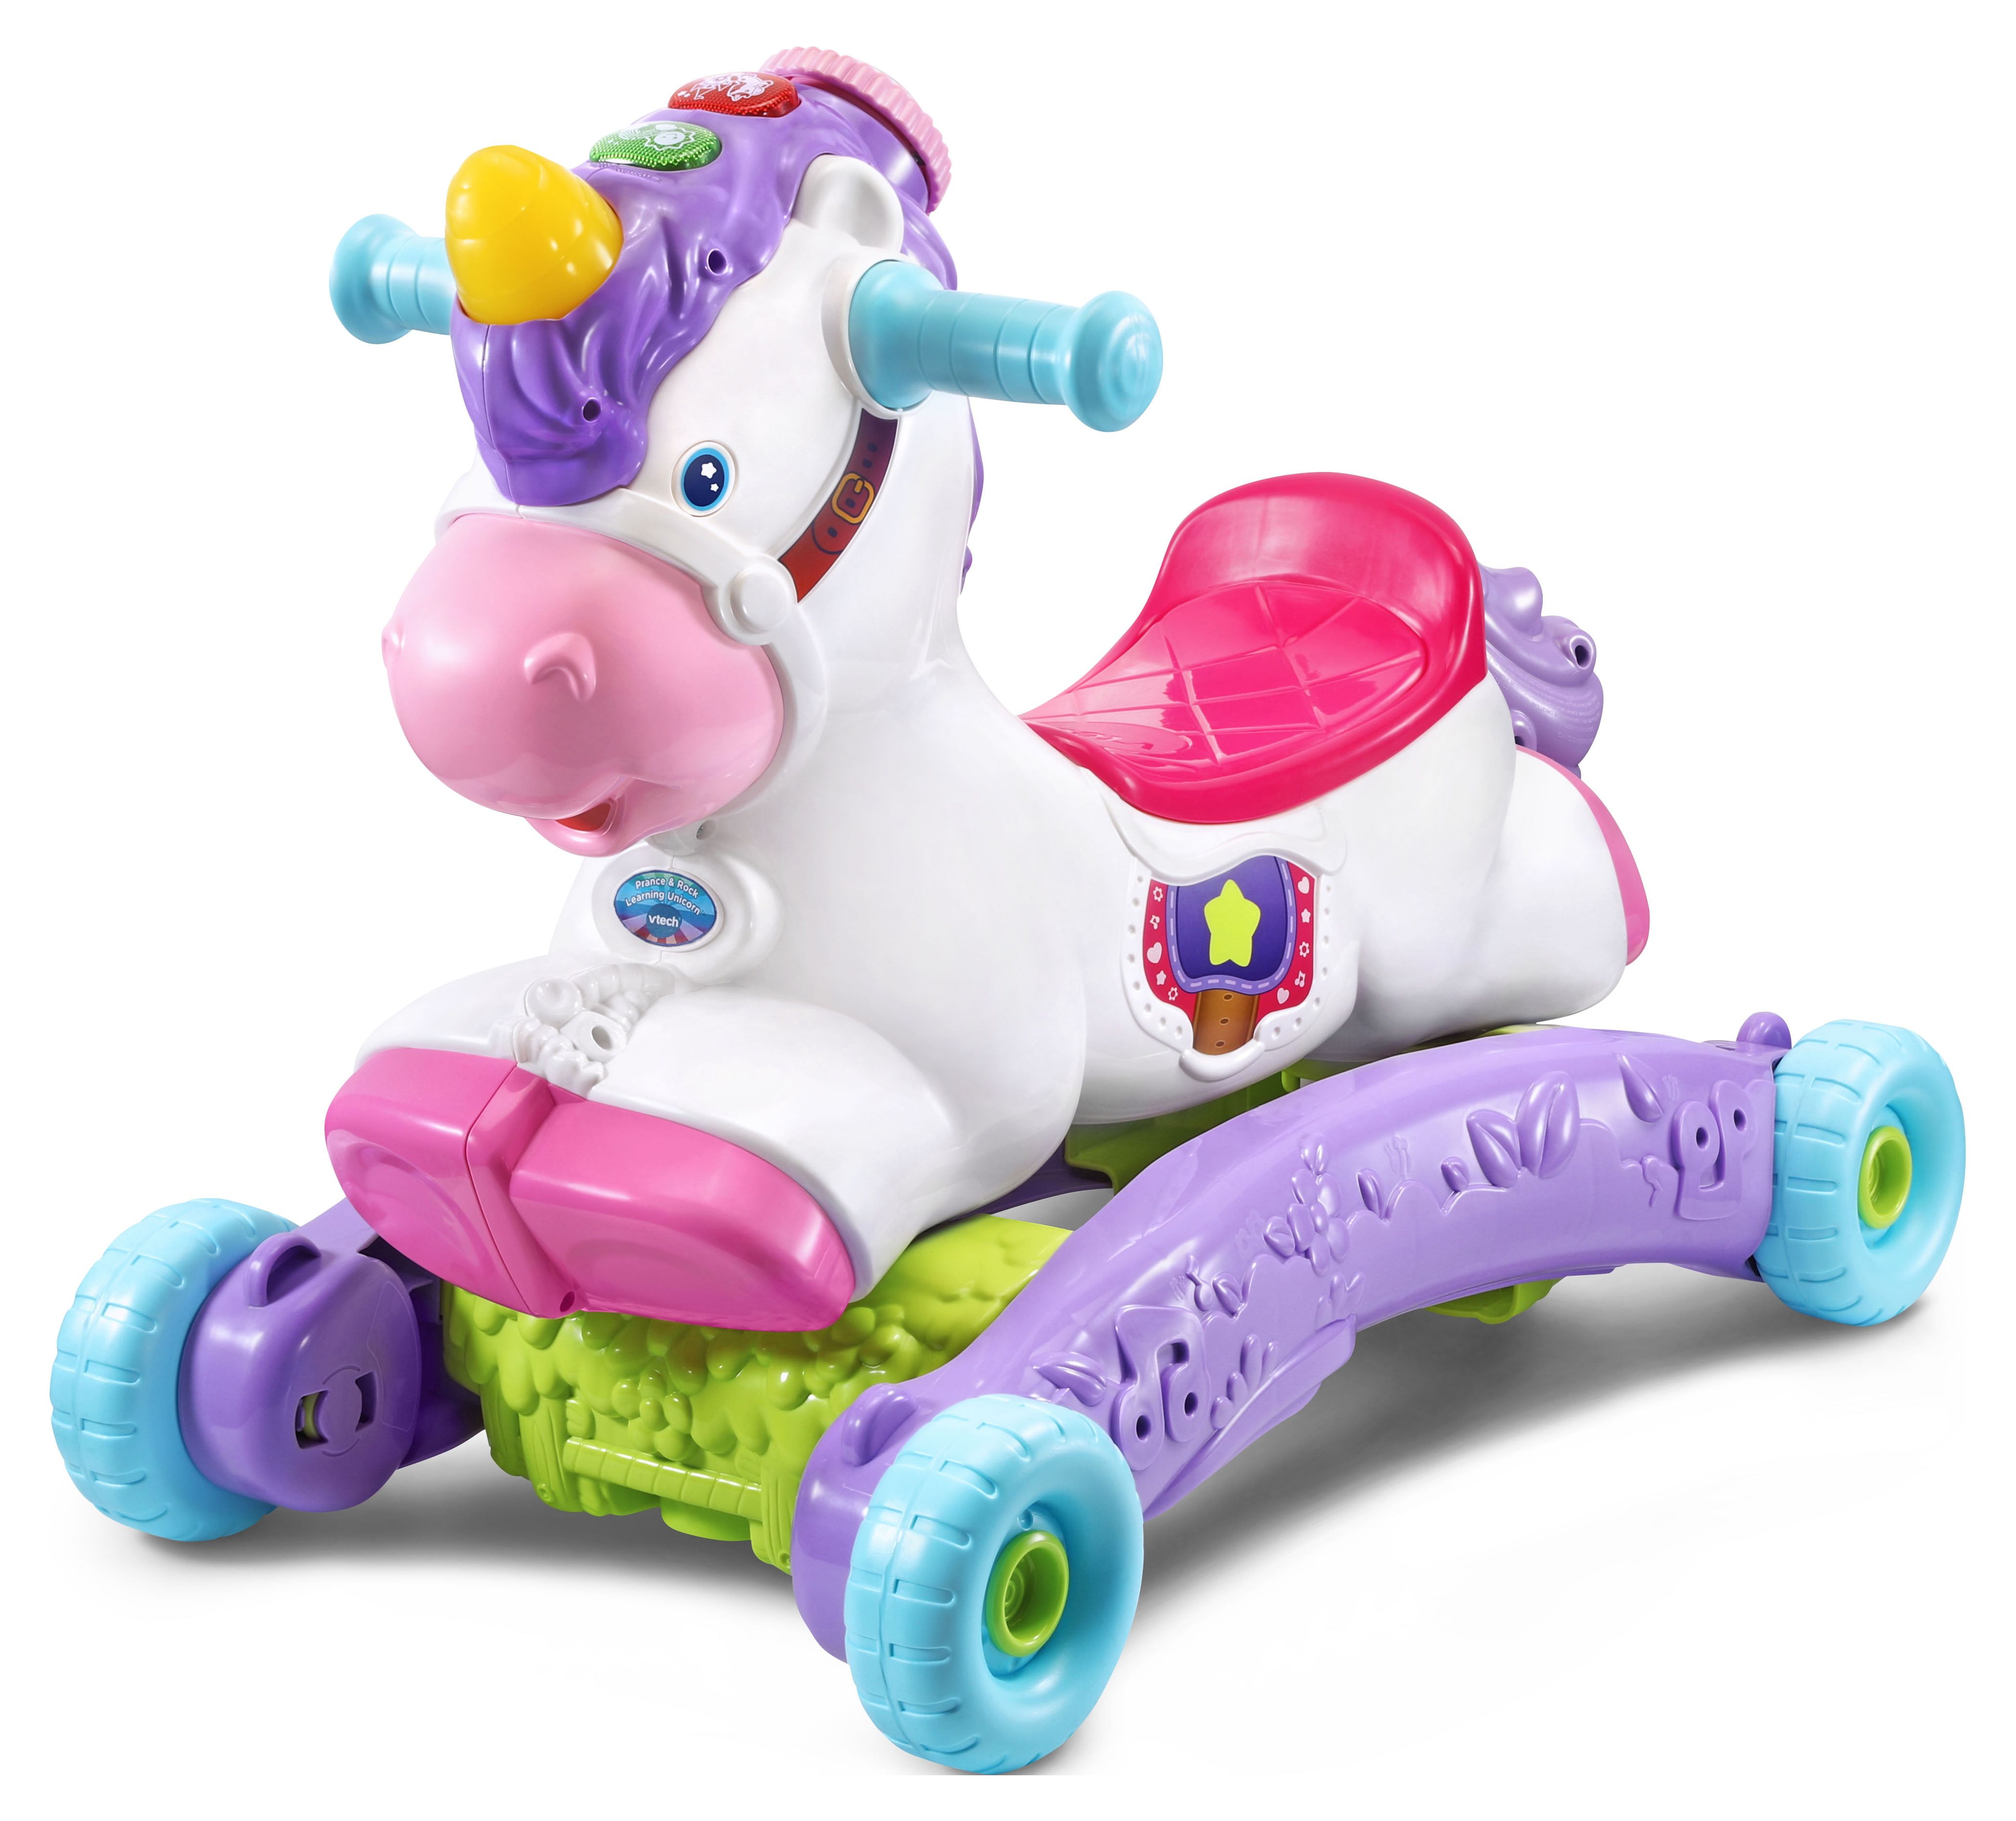 VTech Prance and Rock Learning Unicorn, Rocker to Rider Toy, Motion-Activated Responses - image 12 of 14